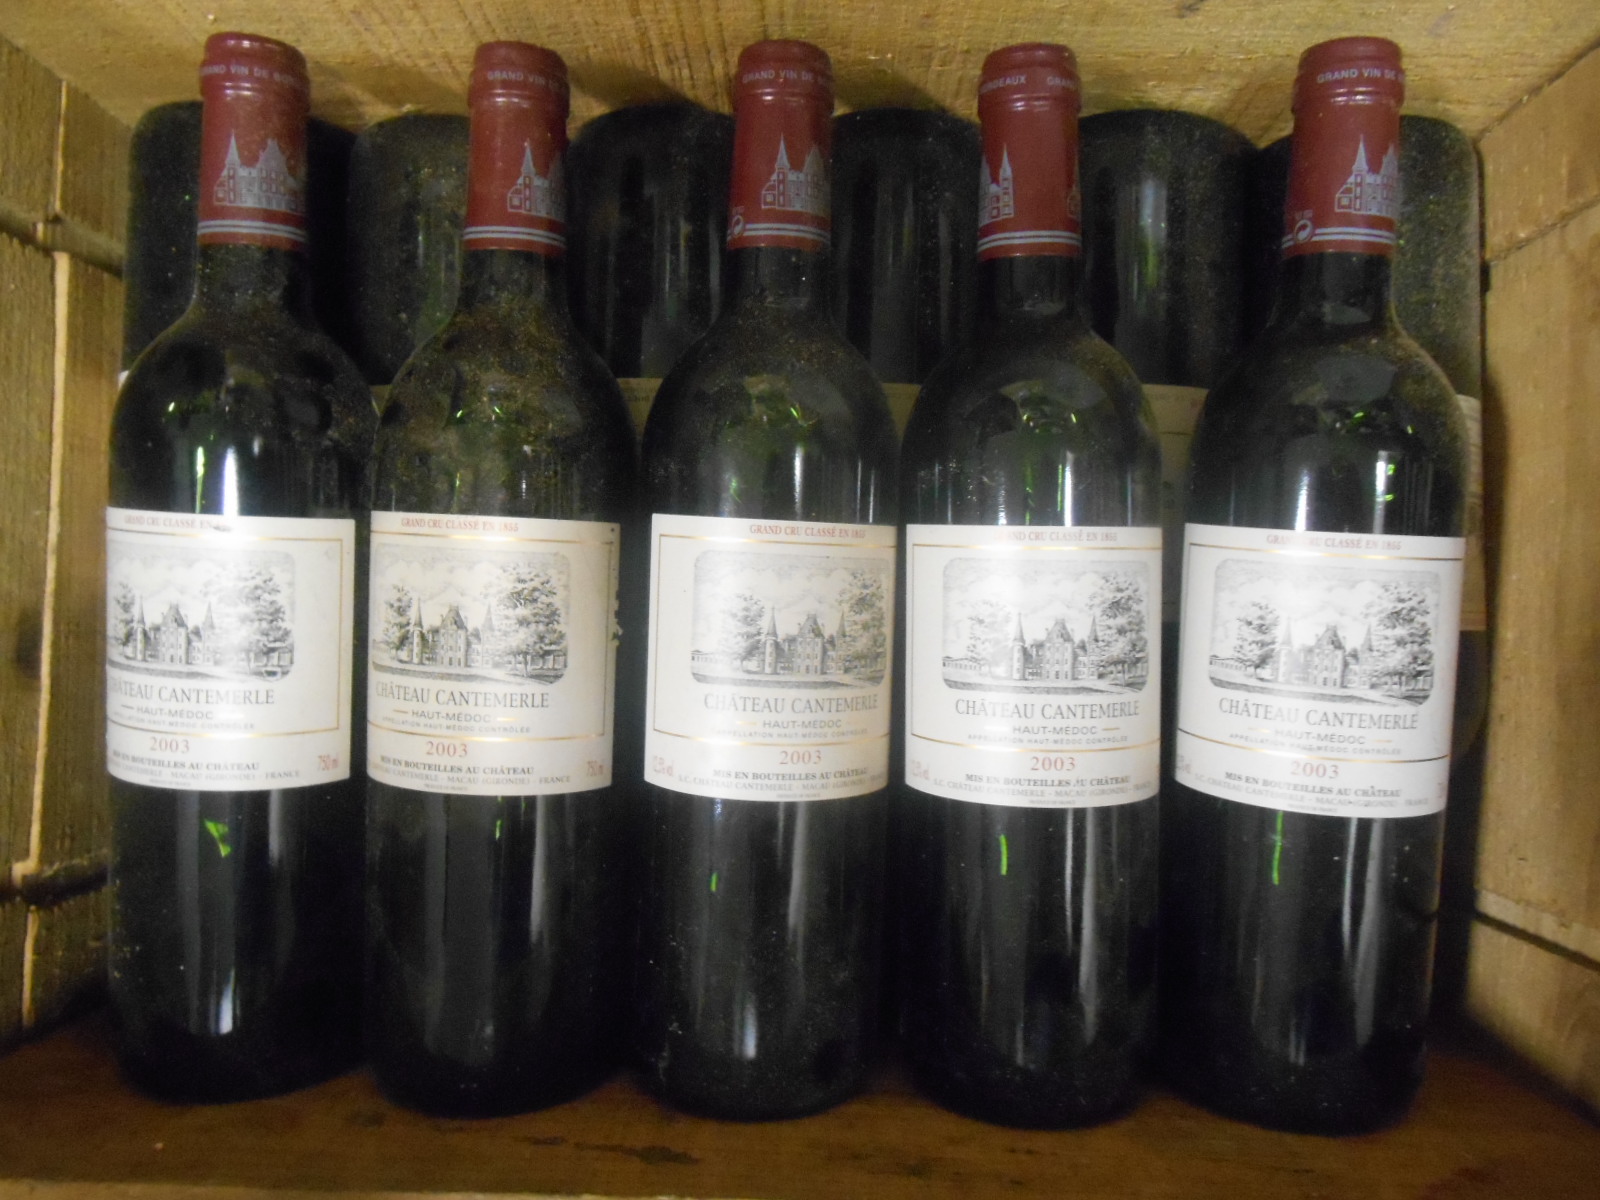 Chateau Cantemerle, Haut Medoc 5eme Cru 2003, eleven bottles in opened wooden case the vendor